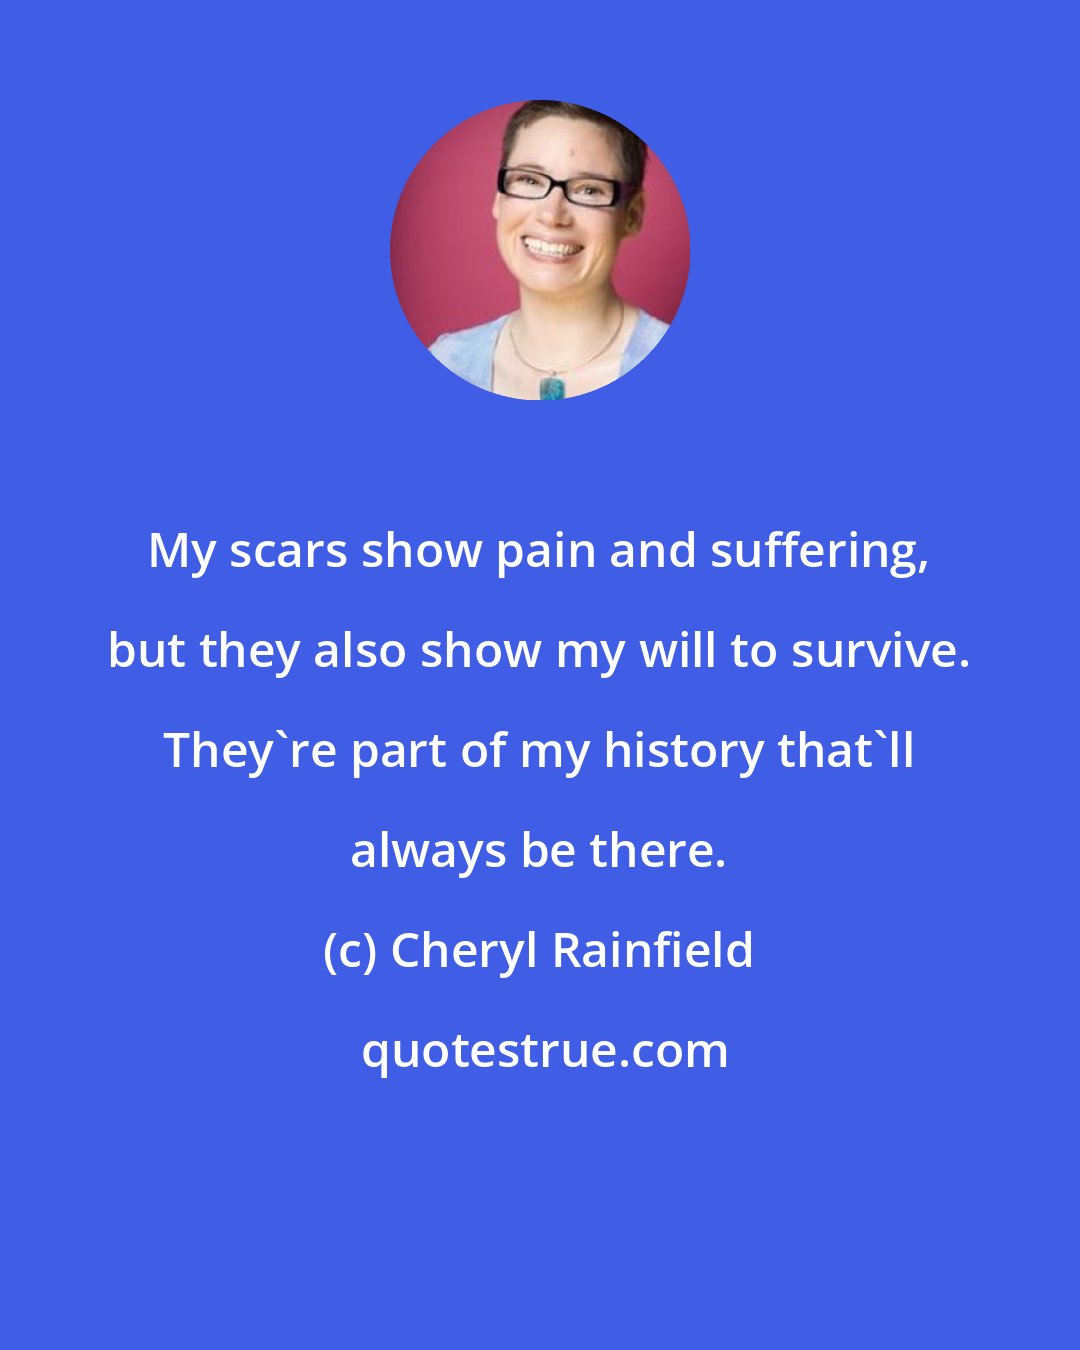 Cheryl Rainfield: My scars show pain and suffering, but they also show my will to survive. They're part of my history that'll always be there.